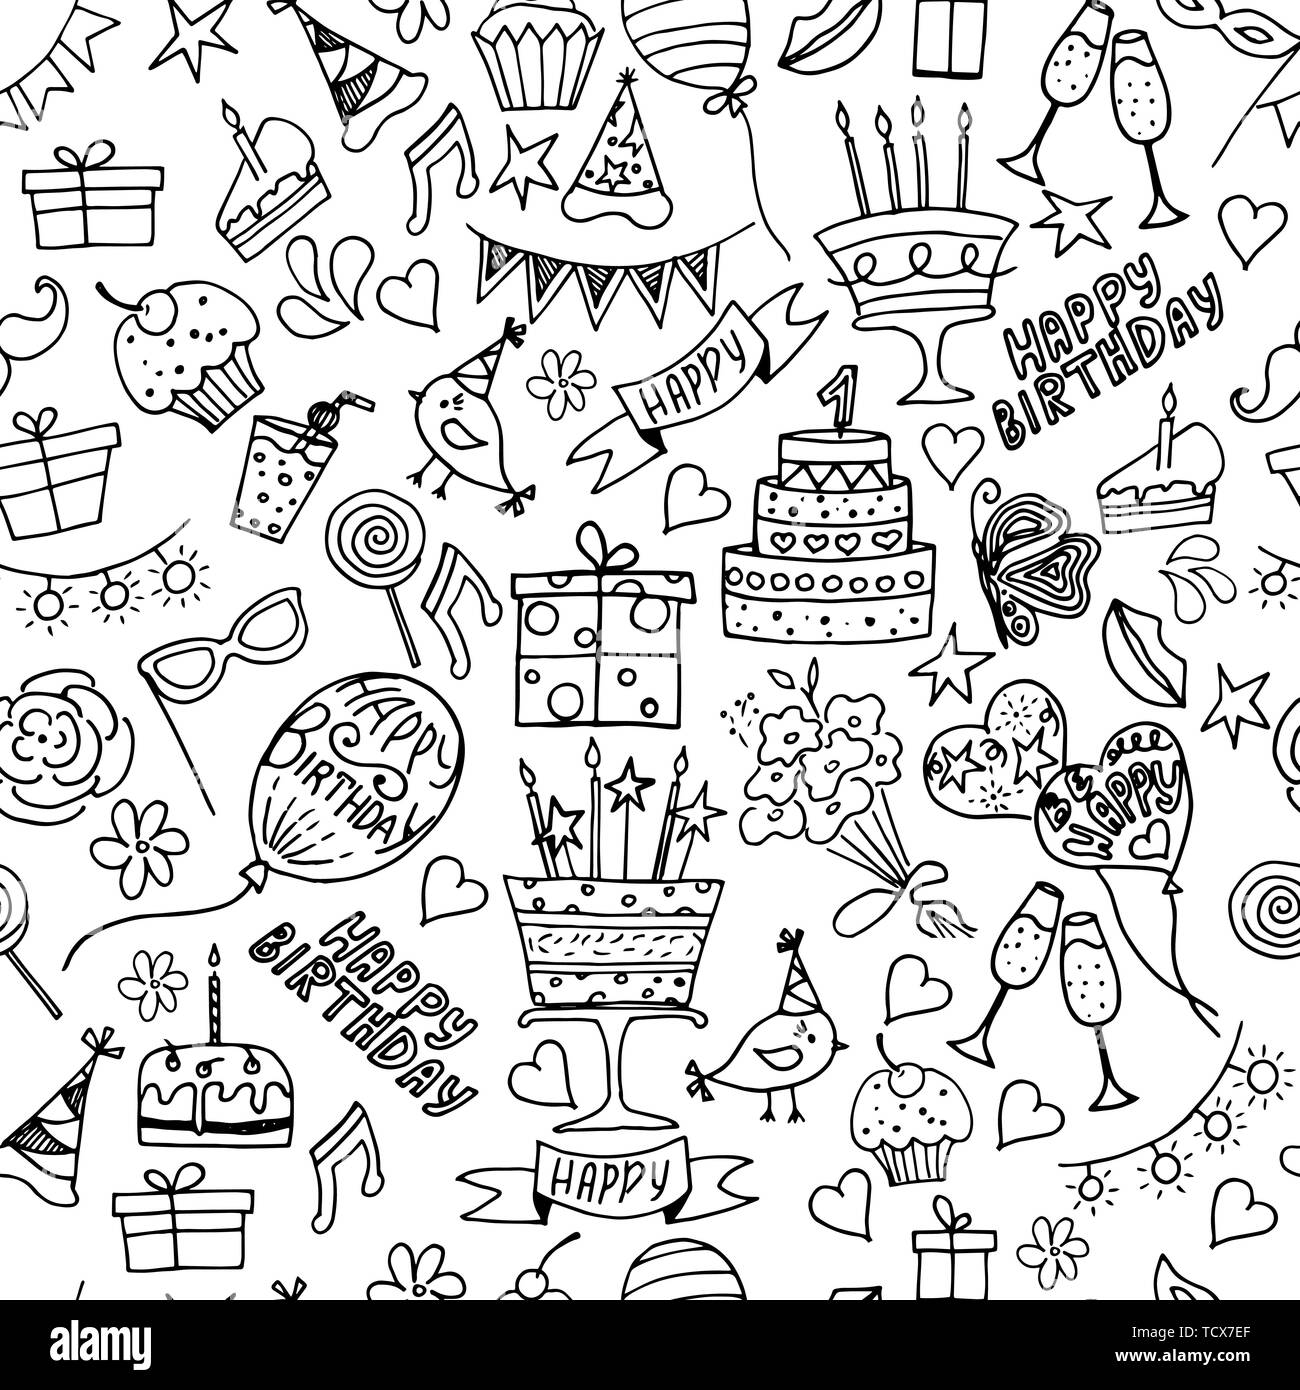 Happy BirtHDay Party Seamless Patterns Vector Illustration Of